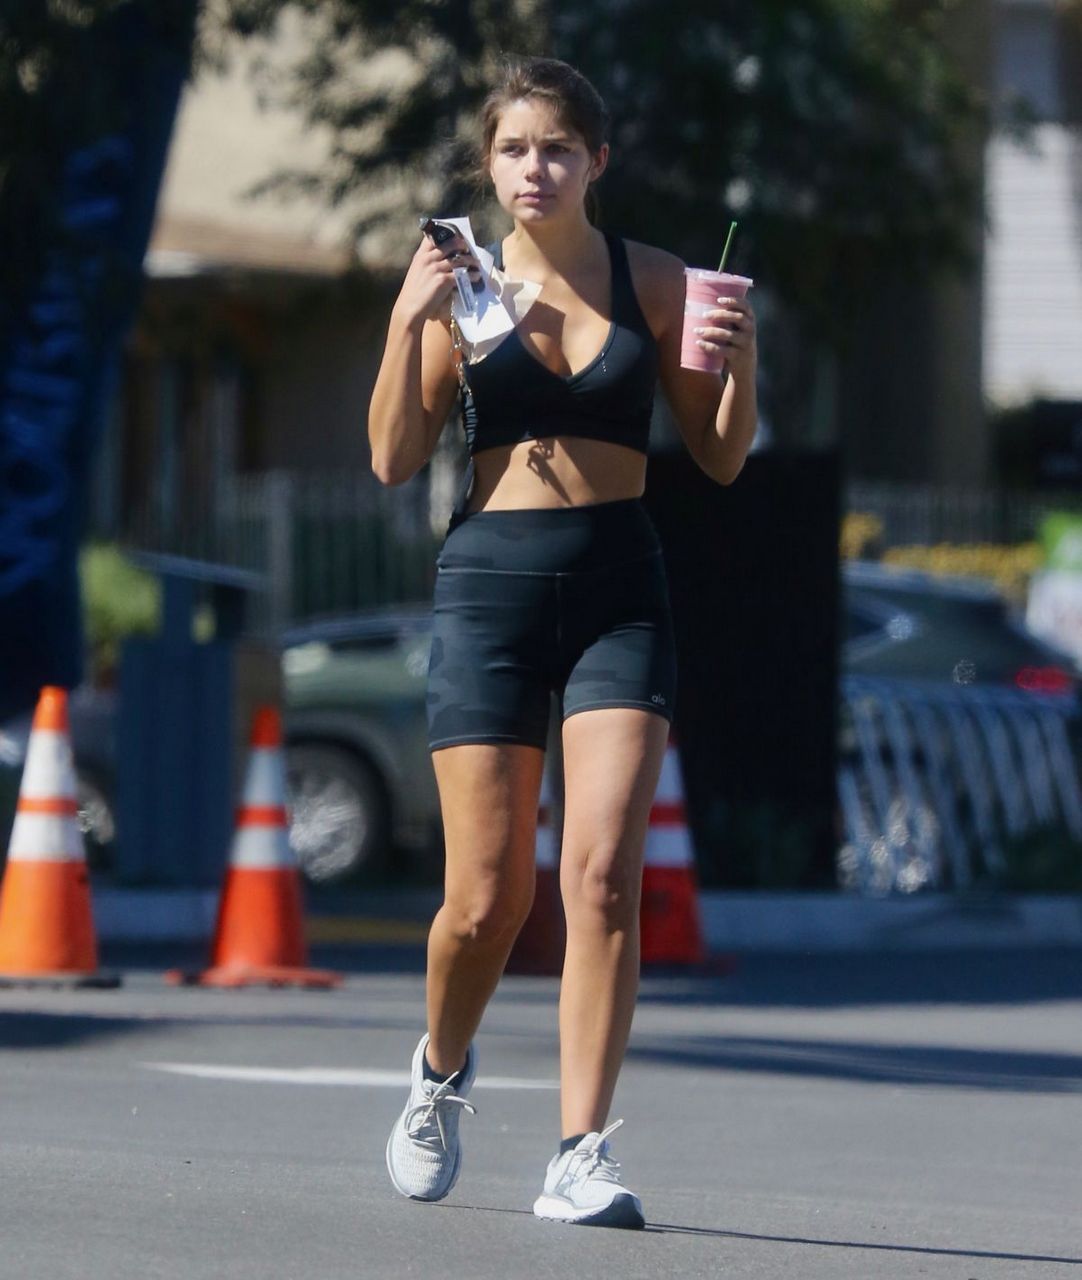 Hannha Ann Sluss Out For Smoothie After Workout West Hollywood